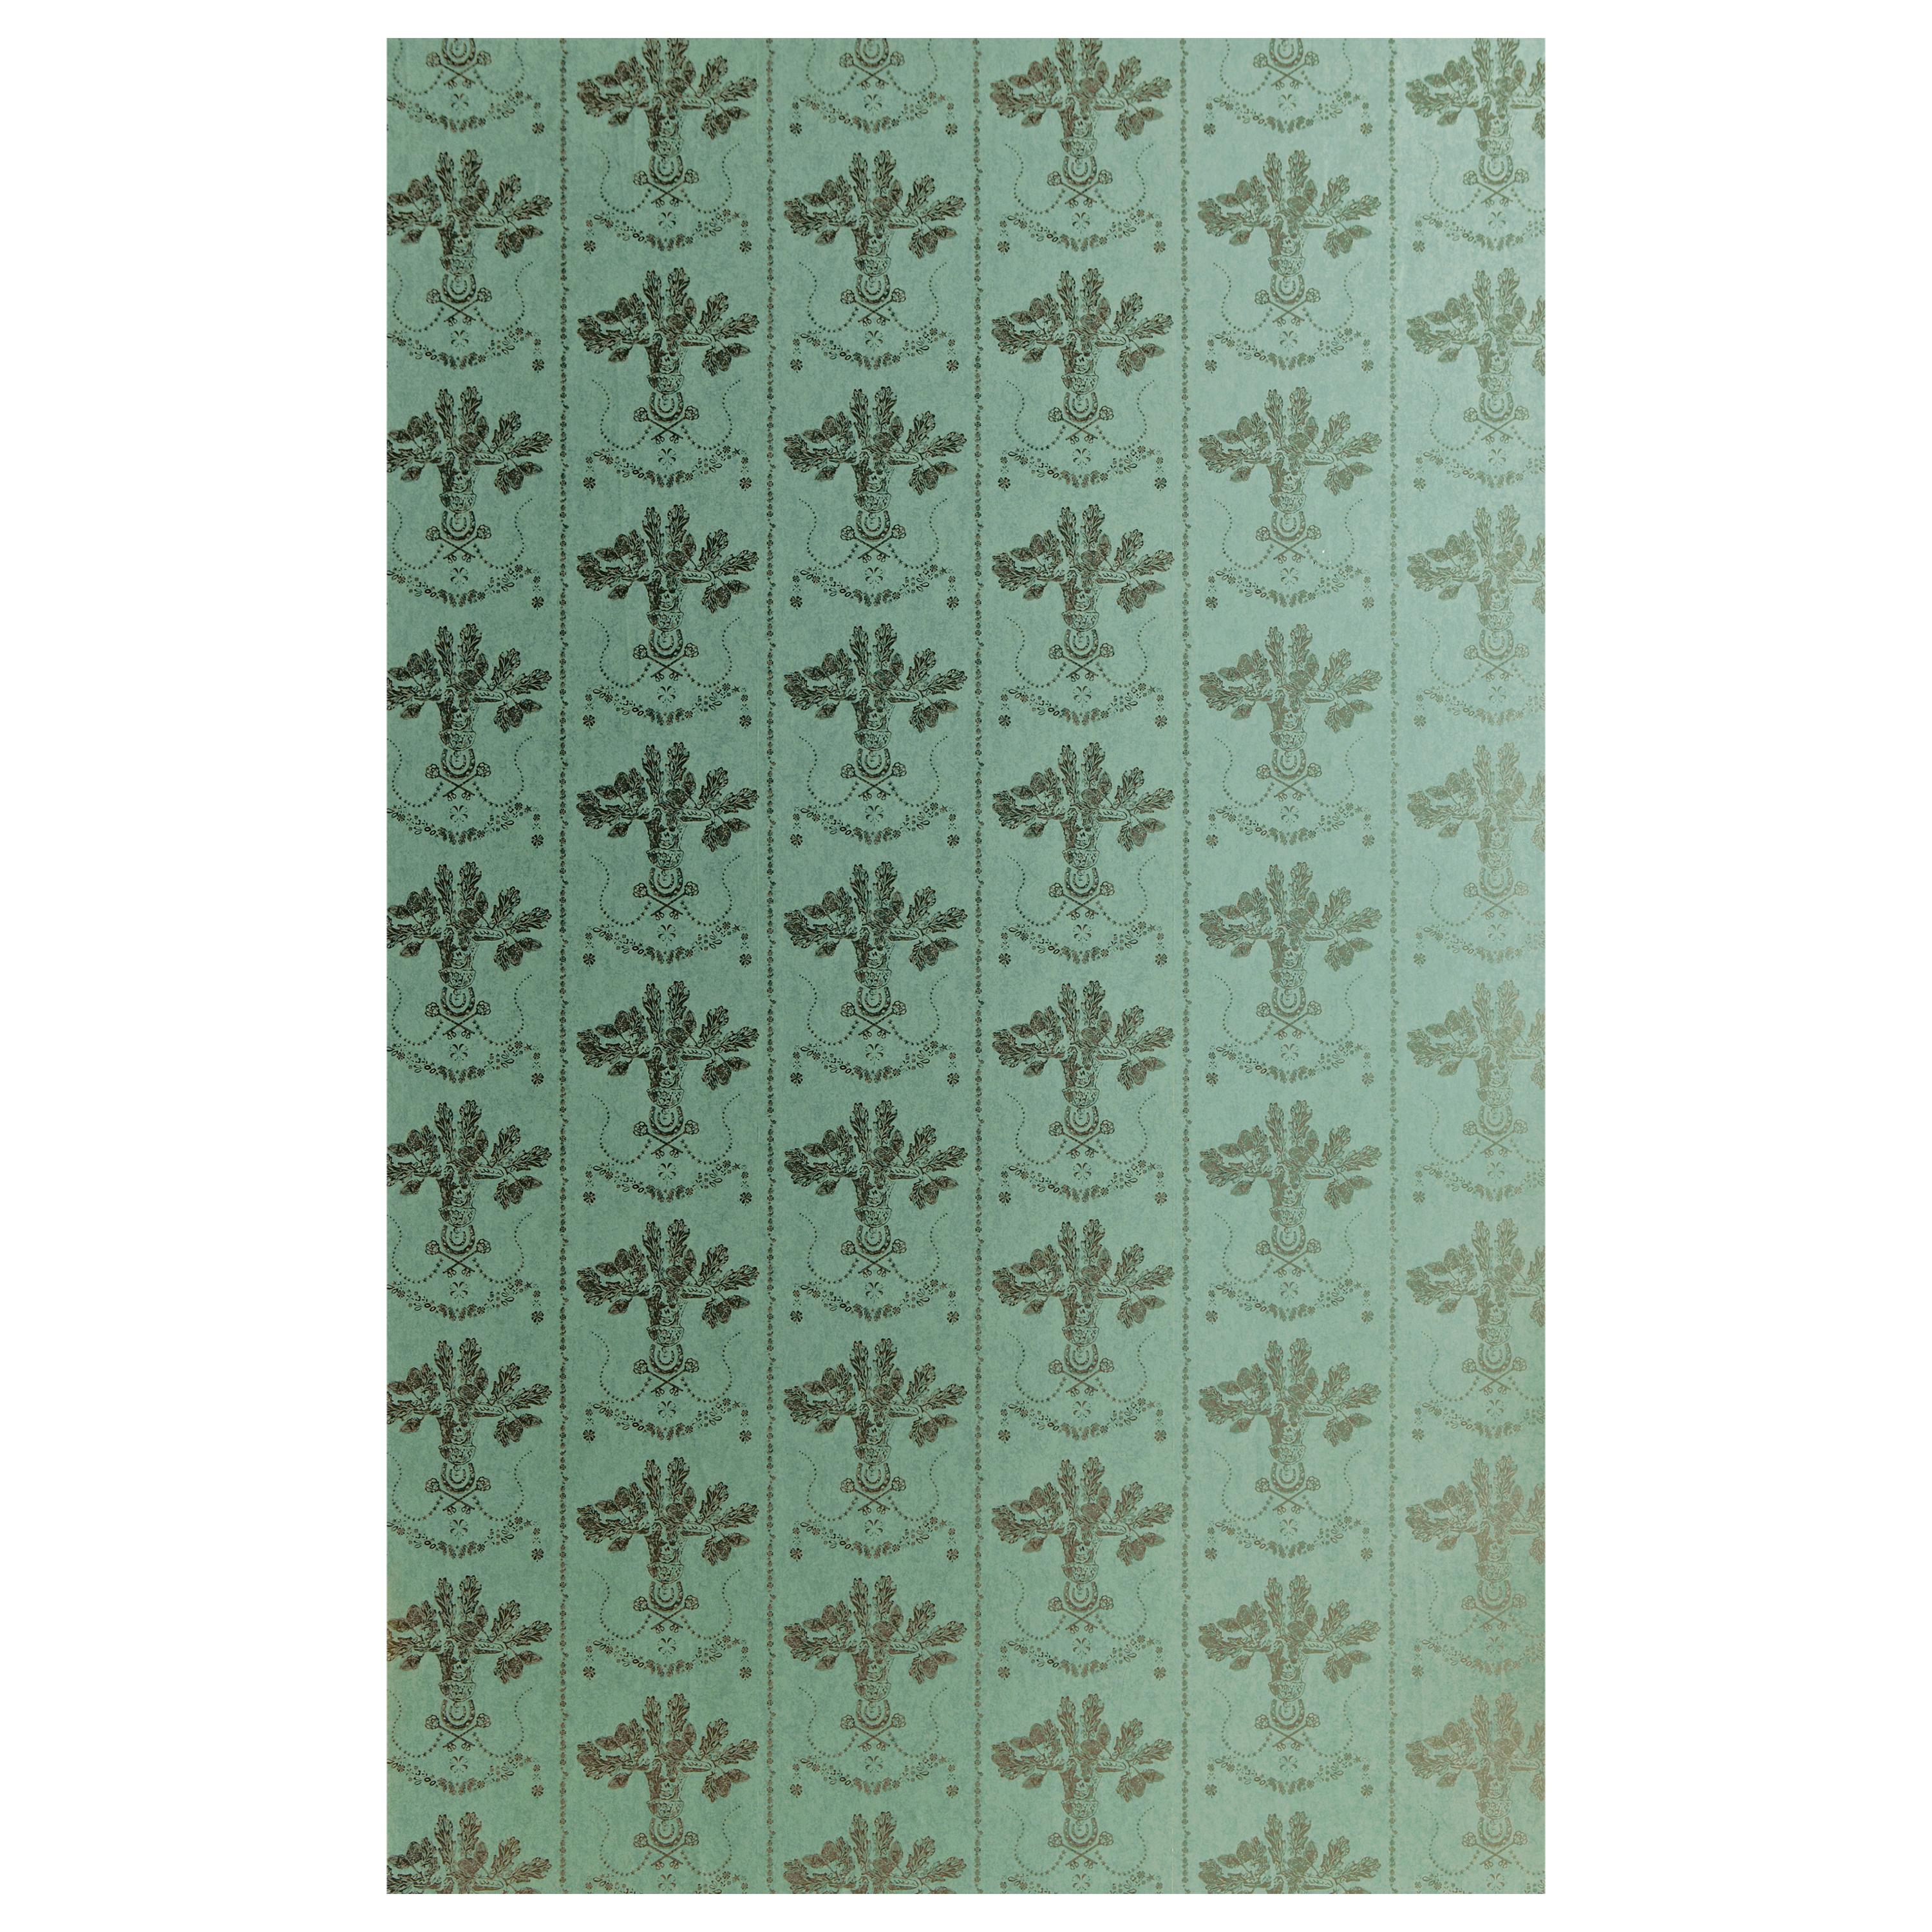 'Lucky Charms' Contemporary, Traditional Wallpaper in Graphite on Denim For Sale